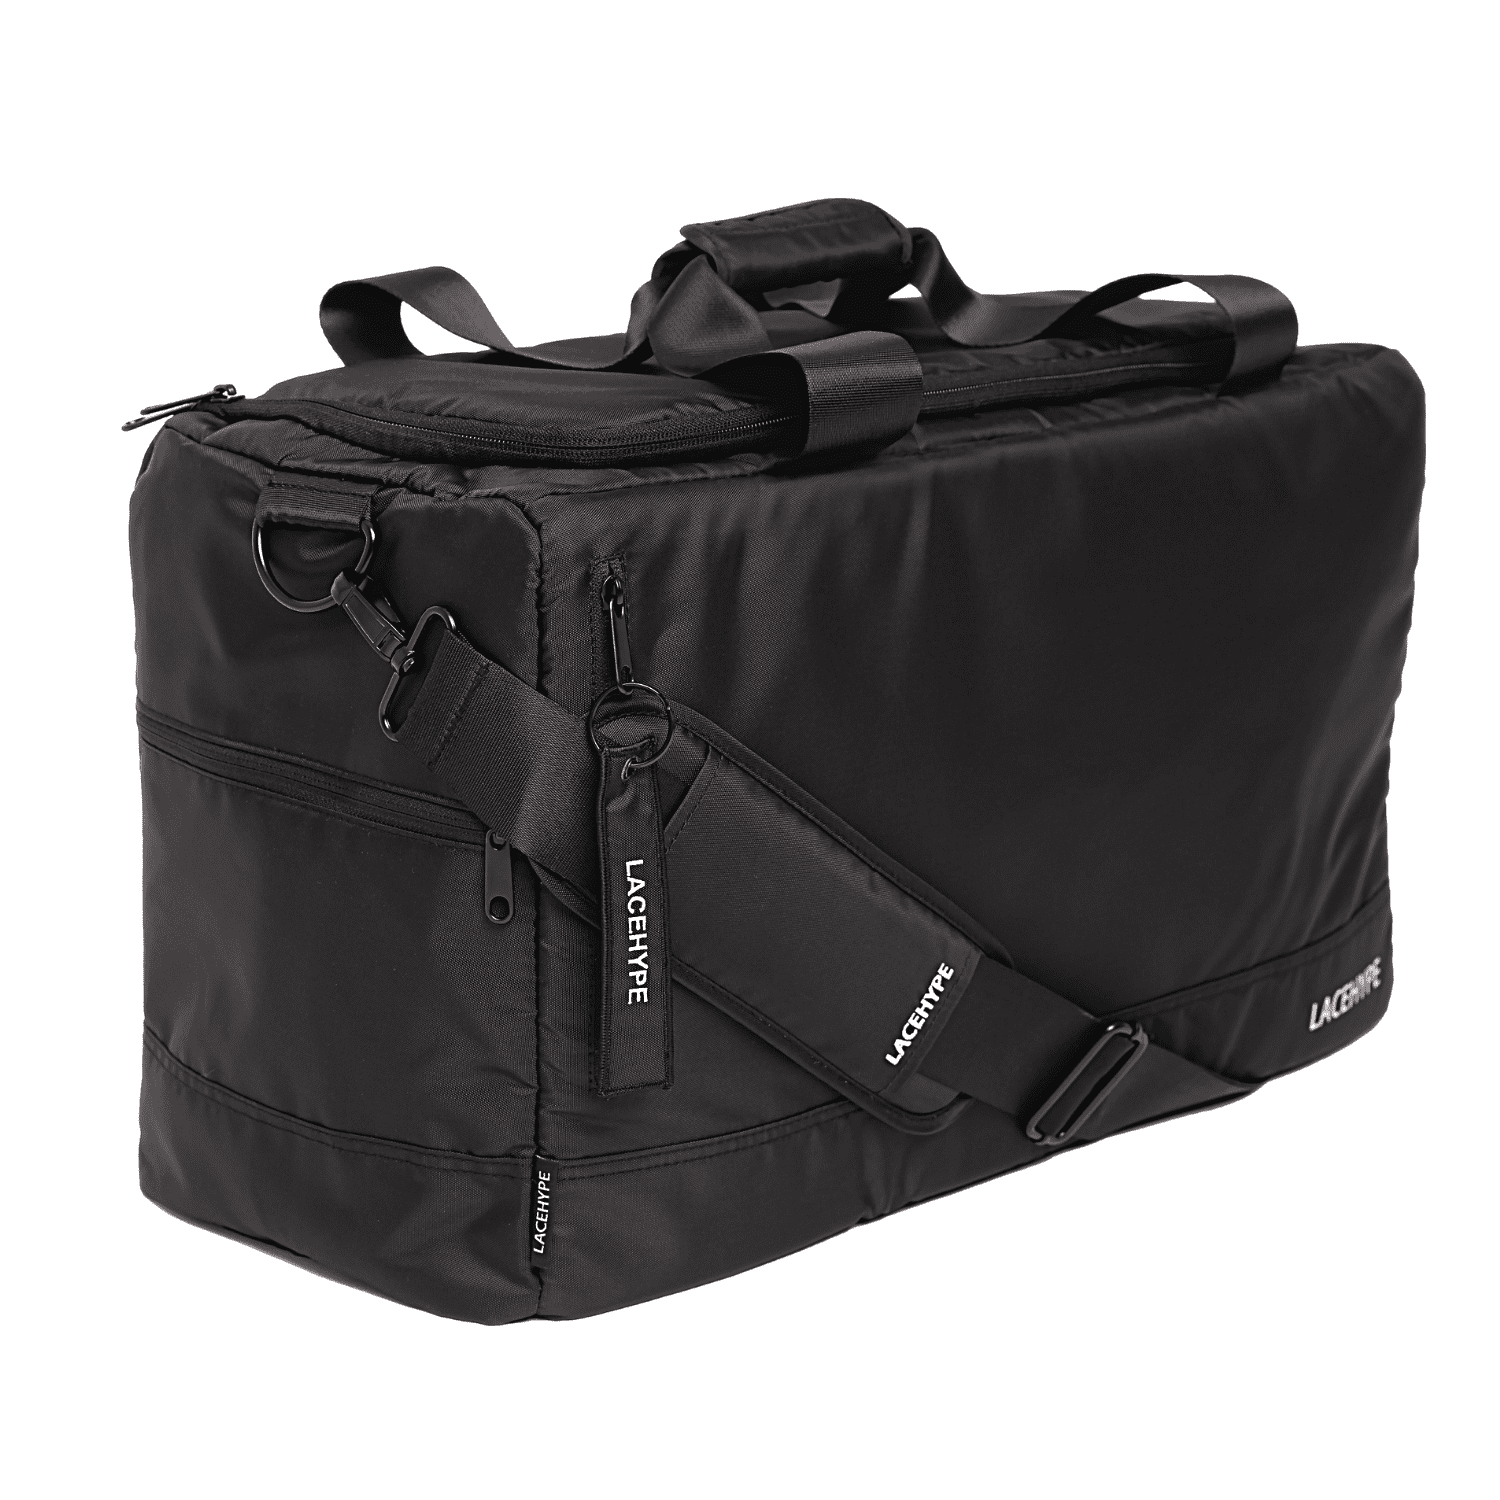 Lacehype Premium Sneaker Duffel Travel Gym Training Bag with 3 Dividers, Adult Unisex, Size: 22.25 x 15 x 4, Black